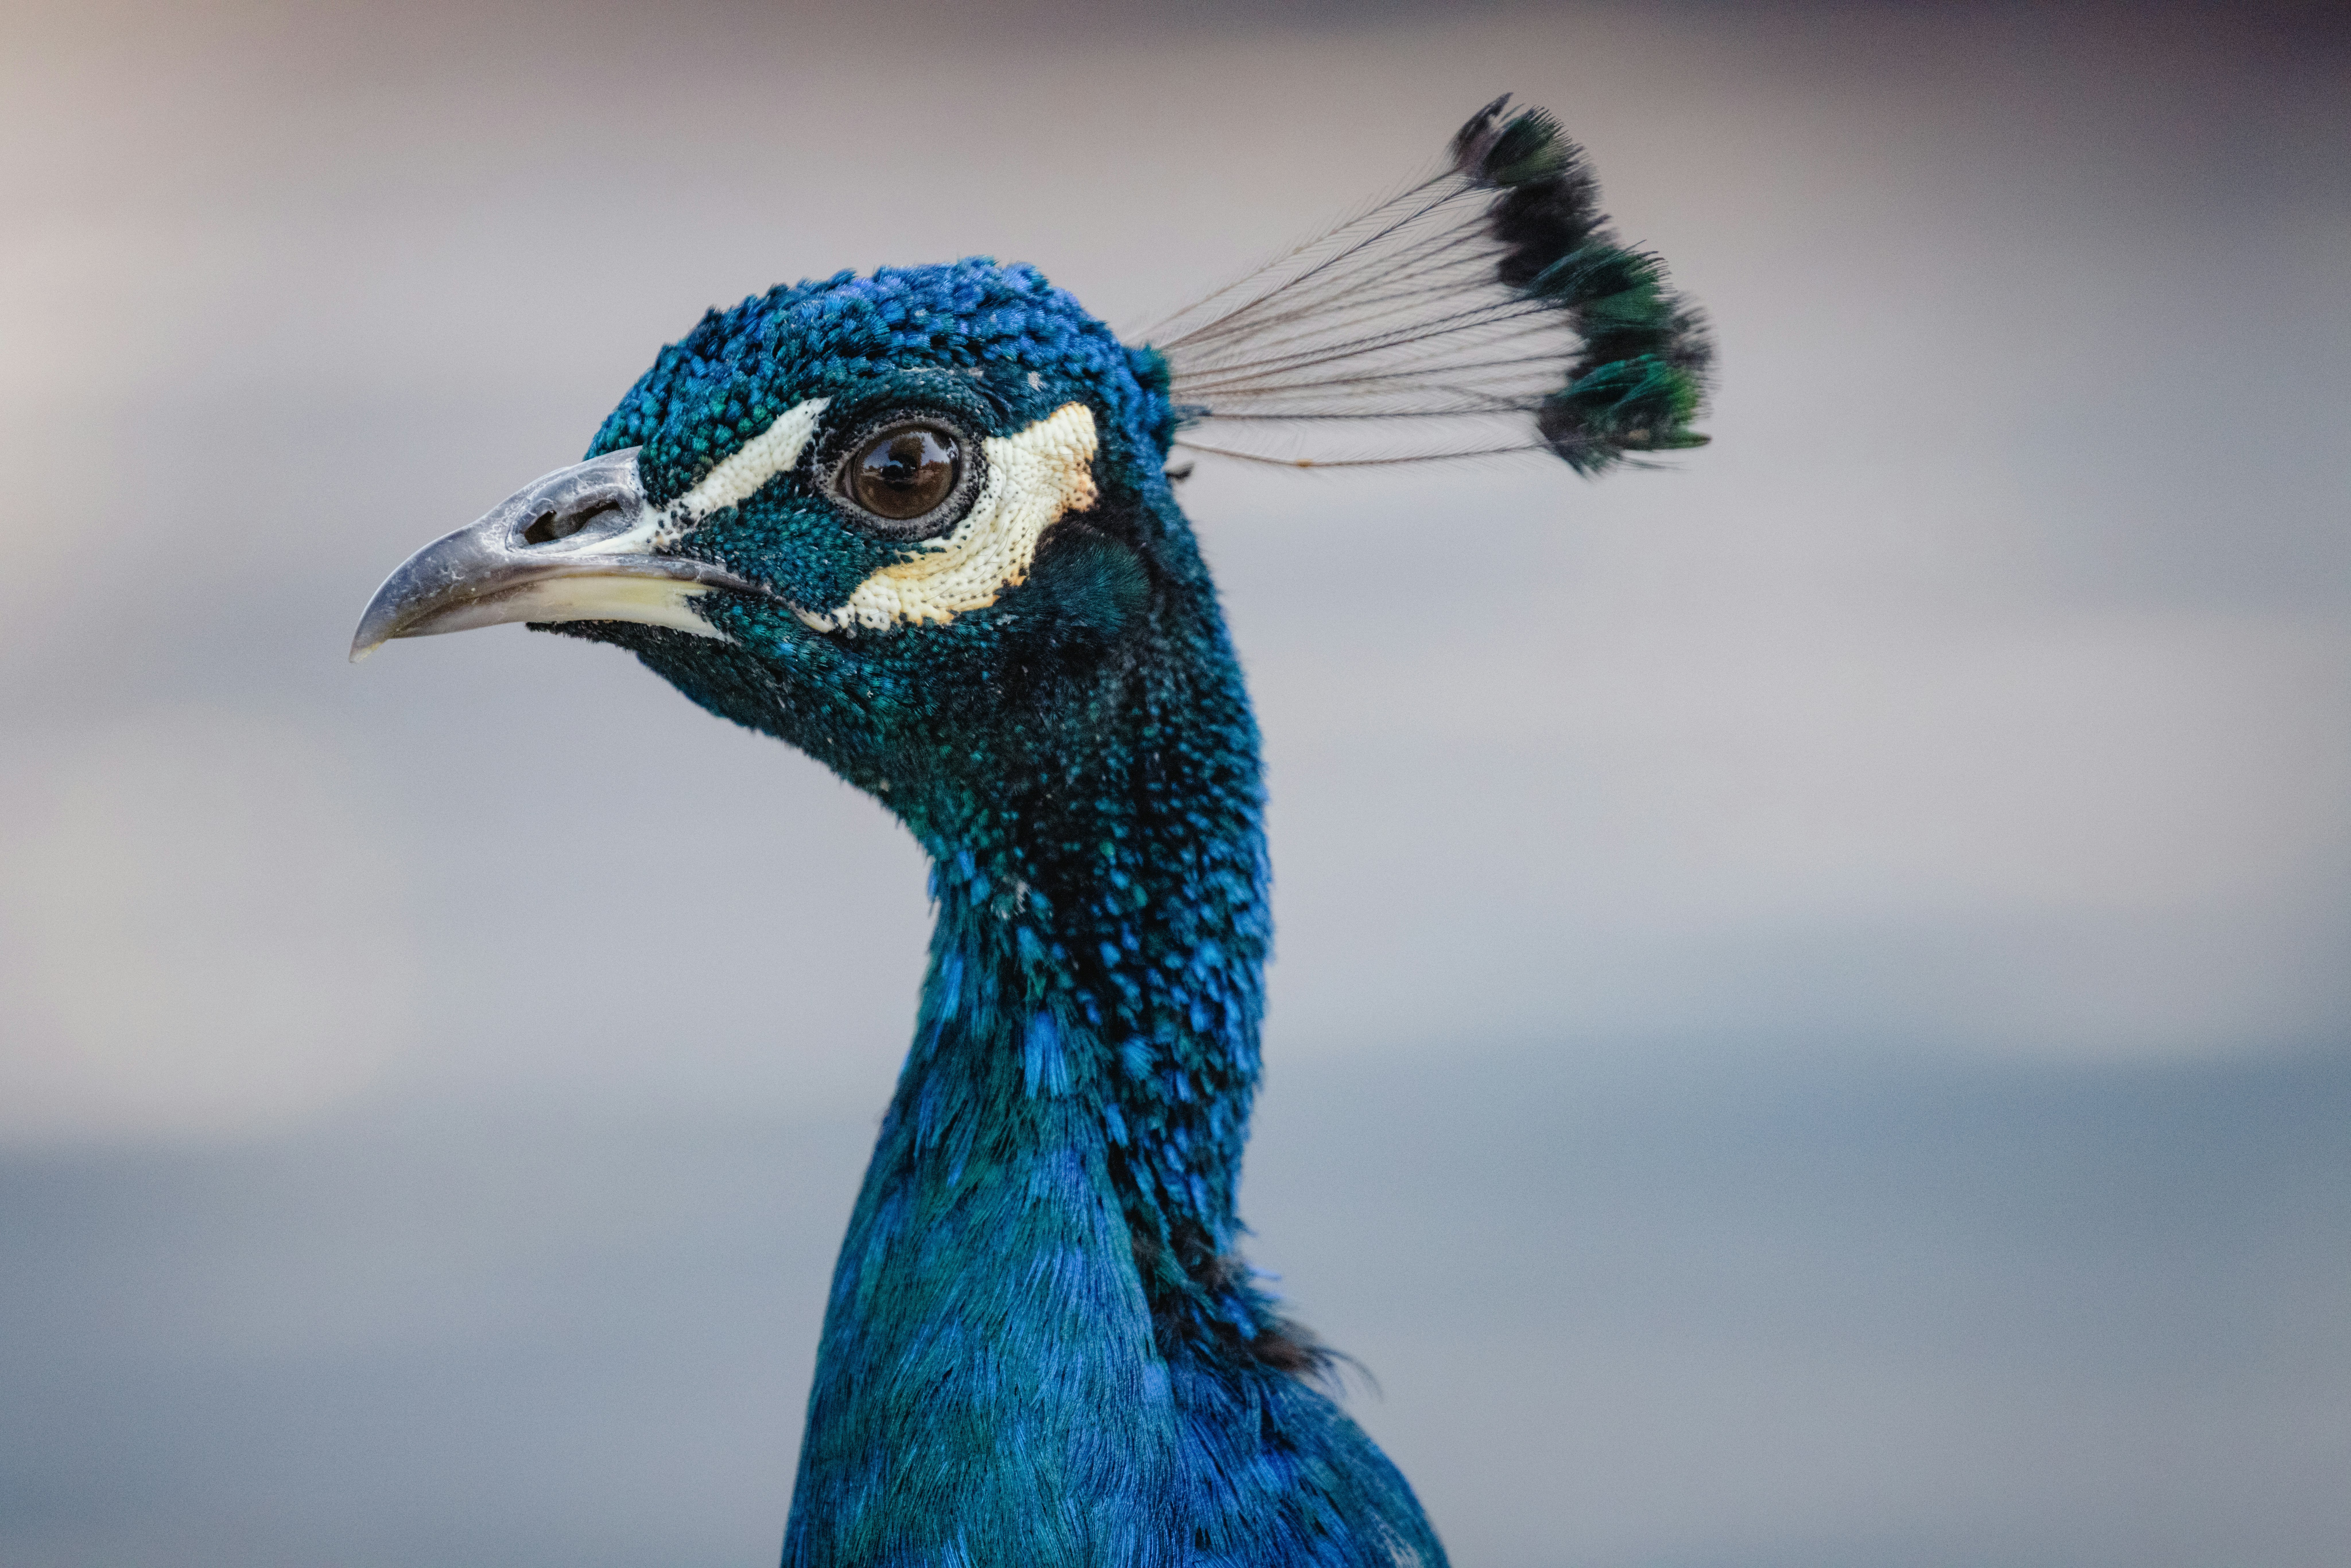 blue peacock in close up photography